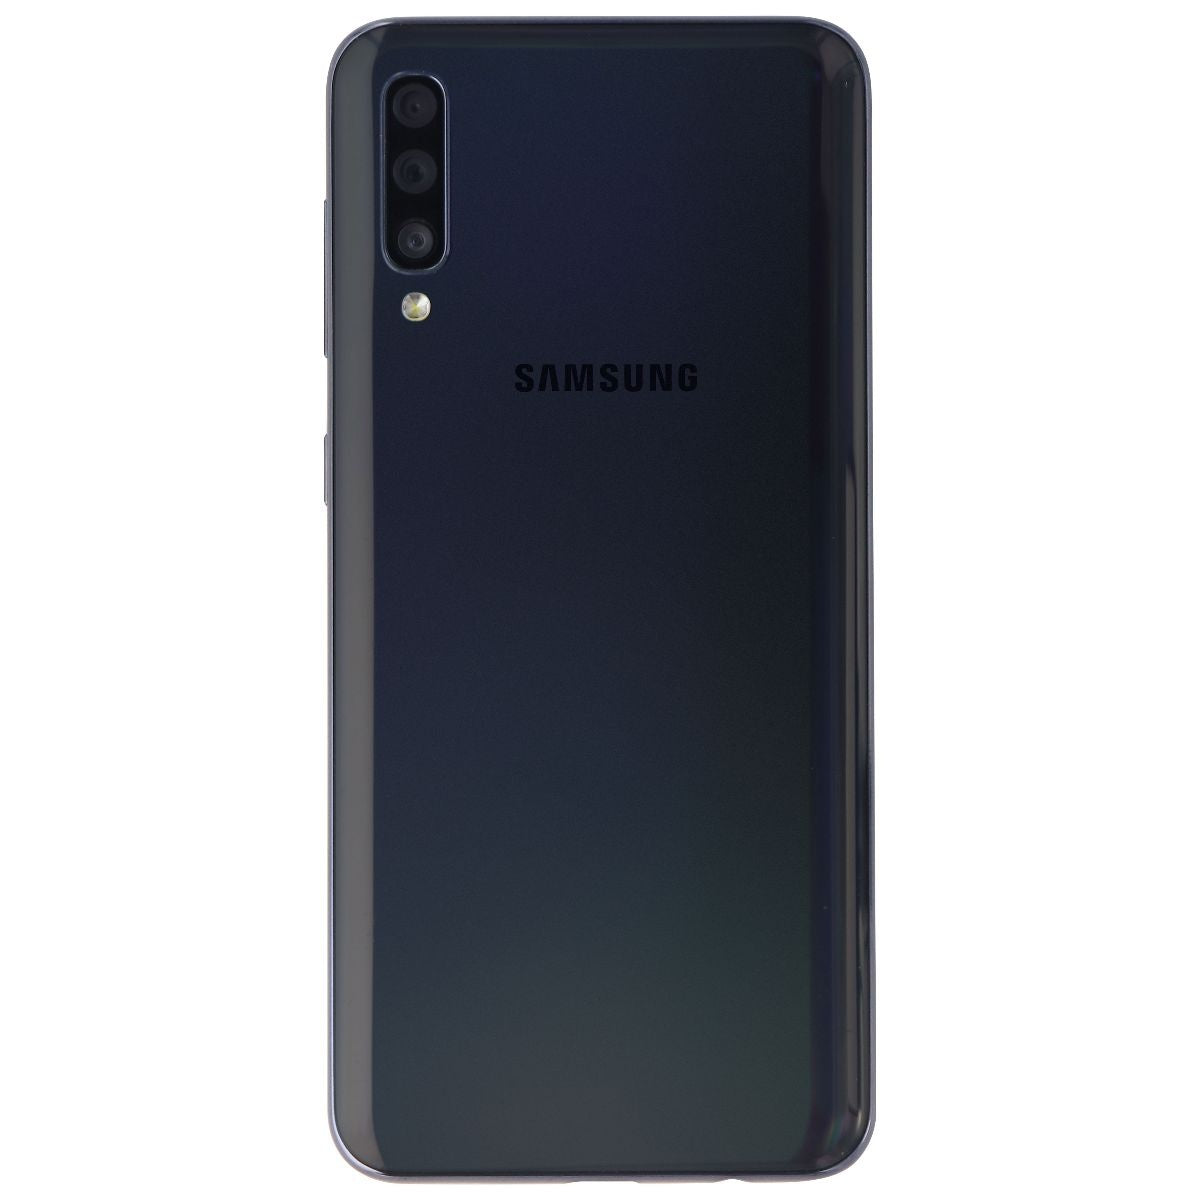 Samsung Galaxy A50 (6.4-in) Smartphone (SM-A505G) Claro Wireless - 64GB / Black Cell Phones & Smartphones Samsung    - Simple Cell Bulk Wholesale Pricing - USA Seller